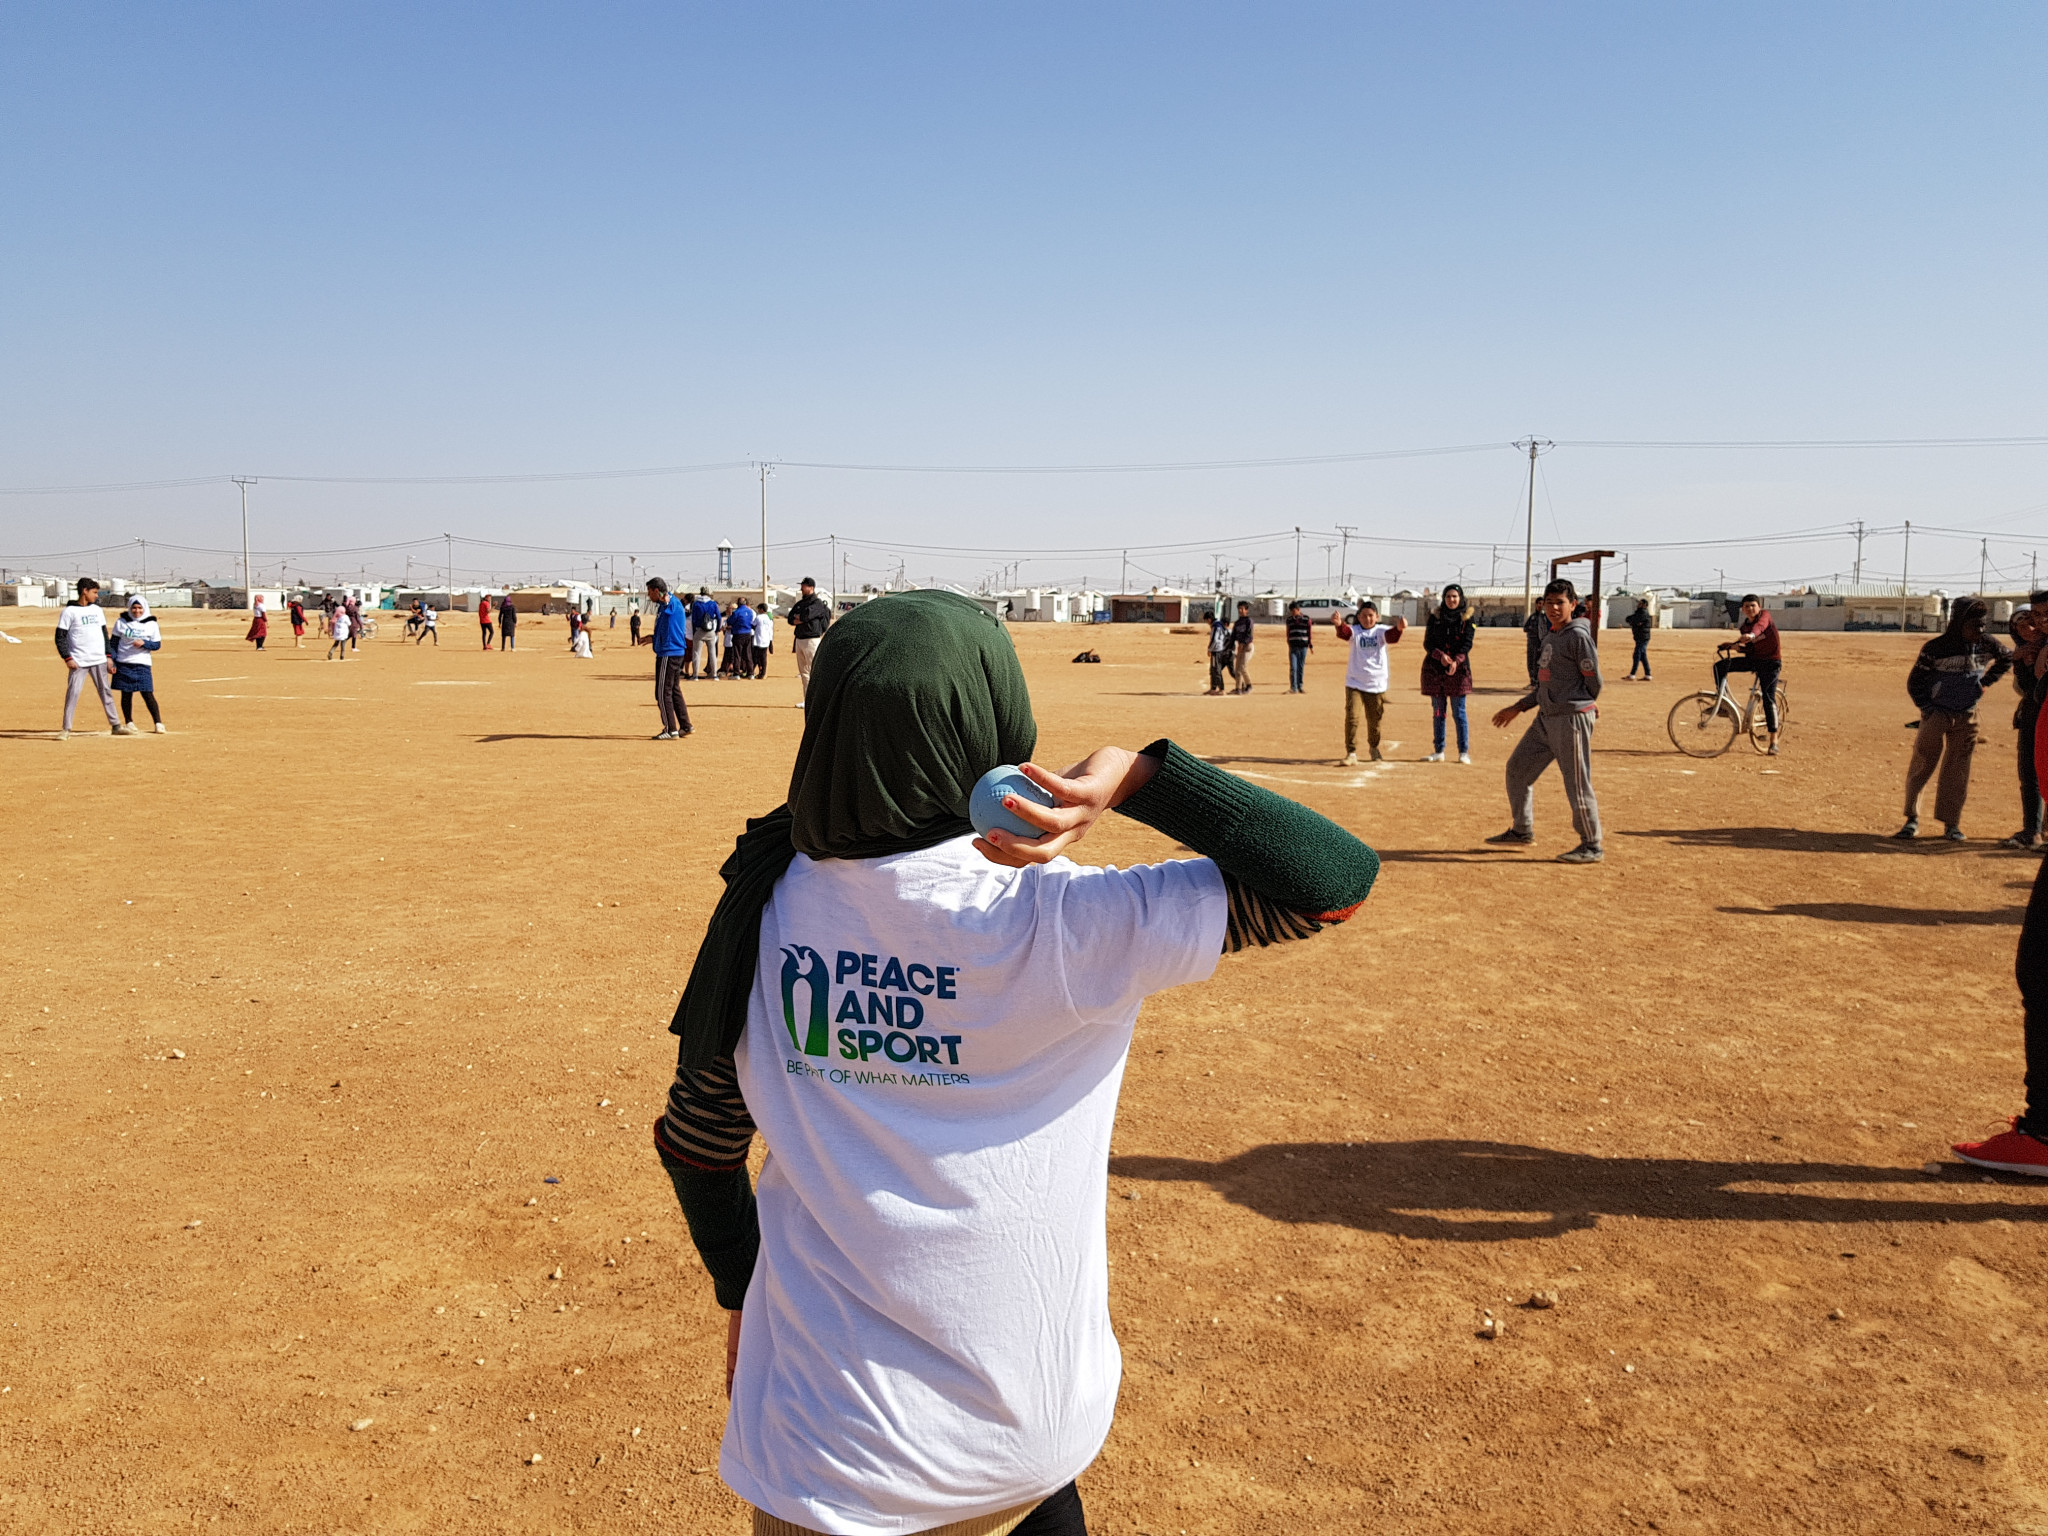 The WBSC used Baseball5 to introduce its sport to refugees at Zaatari camp in Jordan ©Peace and Sport